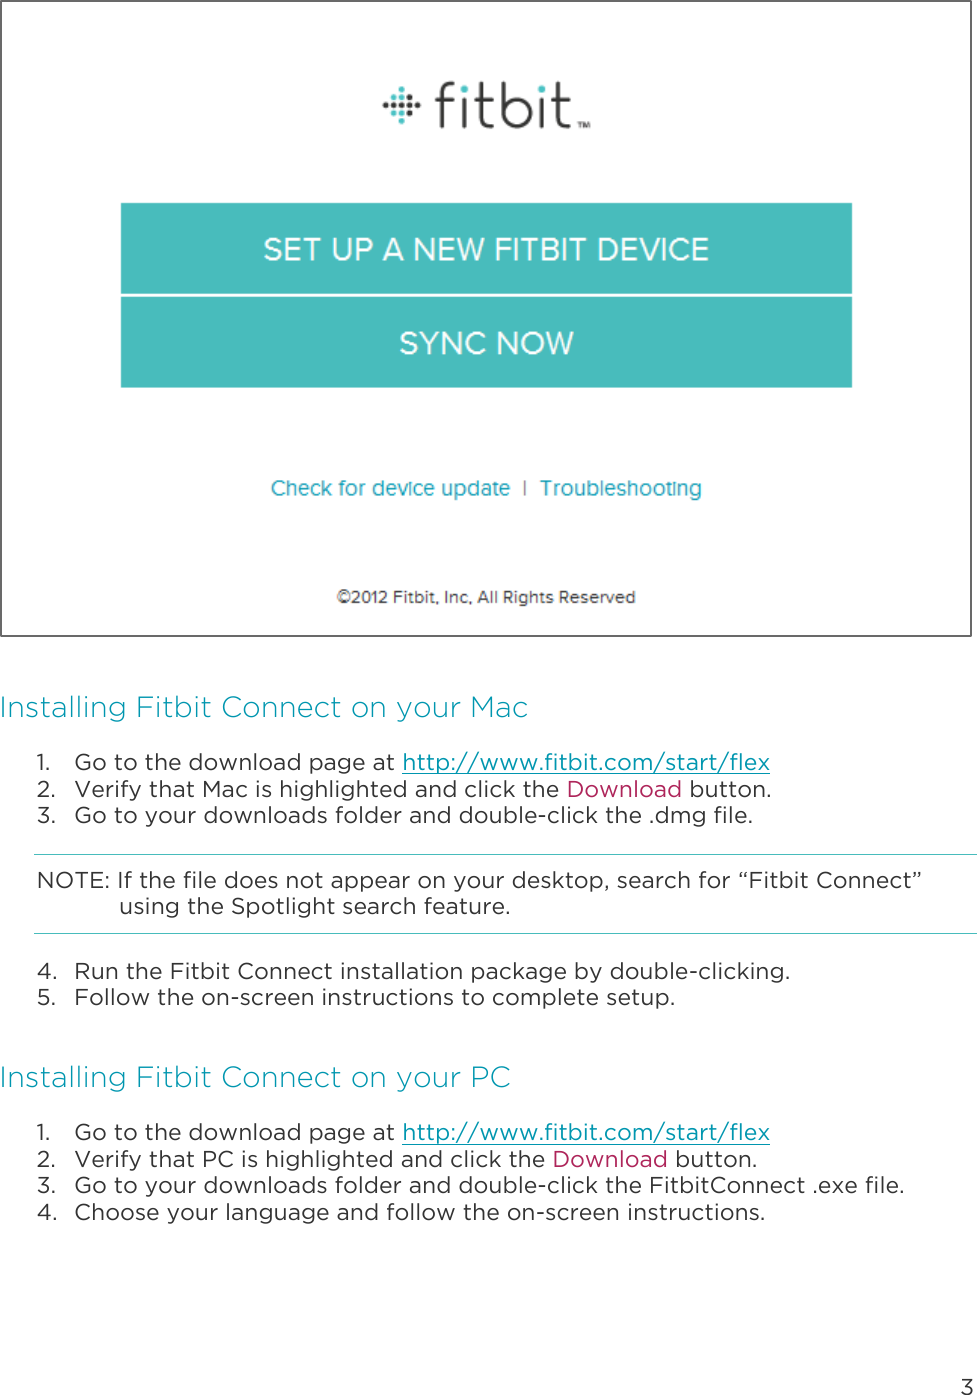 3   Installing Fitbit Connect on your Mac 1. Go to the download page at http://www.fitbit.com/start/flex 2. Verify that Mac is highlighted and click the Download button. 3. Go to your downloads folder and double-click the .dmg file. NOTE: If the file does not appear on your desktop, search for “Fitbit Connect” using the Spotlight search feature.  4. Run the Fitbit Connect installation package by double-clicking. 5. Follow the on-screen instructions to complete setup.  Installing Fitbit Connect on your PC 1. Go to the download page at http://www.fitbit.com/start/flex 2. Verify that PC is highlighted and click the Download button. 3. Go to your downloads folder and double-click the FitbitConnect .exe file. 4. Choose your language and follow the on-screen instructions. 